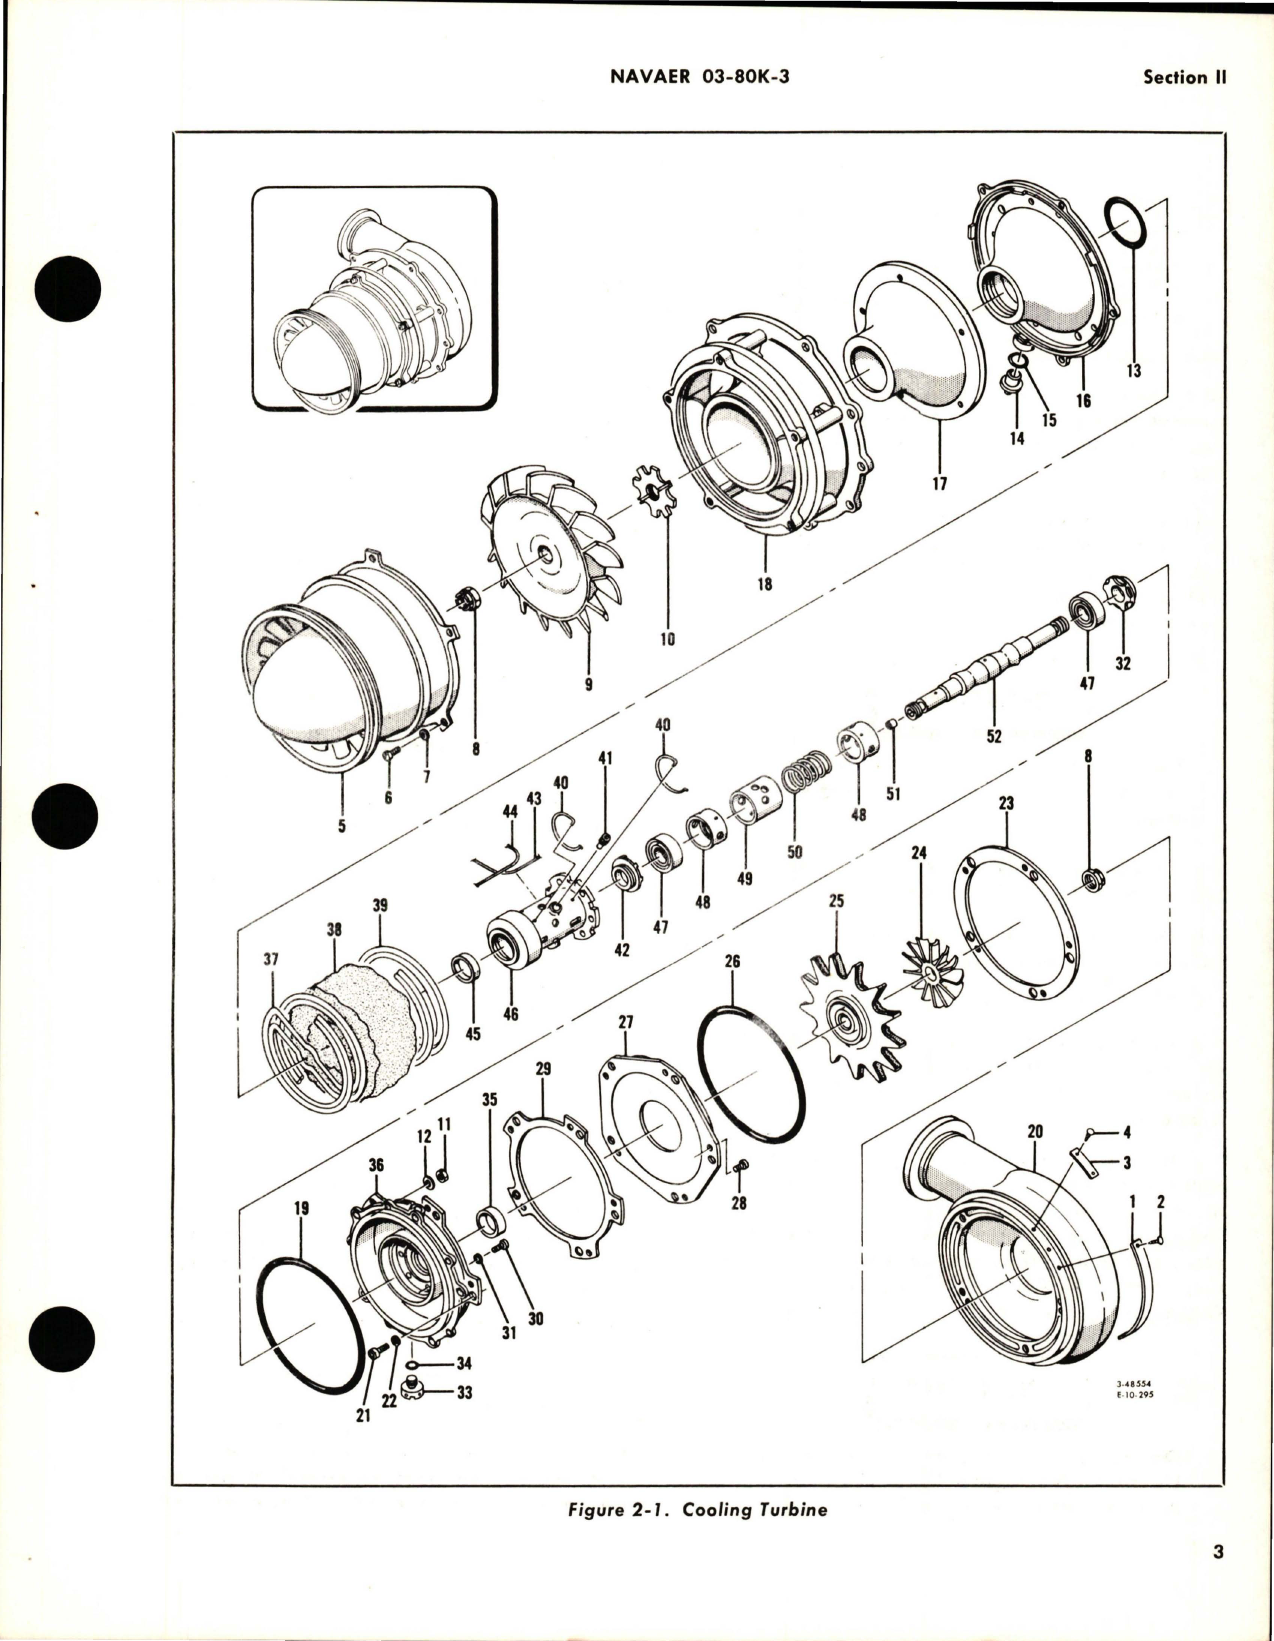 Sample page 7 from AirCorps Library document: Overhaul Instructions for Cooling Turbine - Part 202270 - Model CT18-4